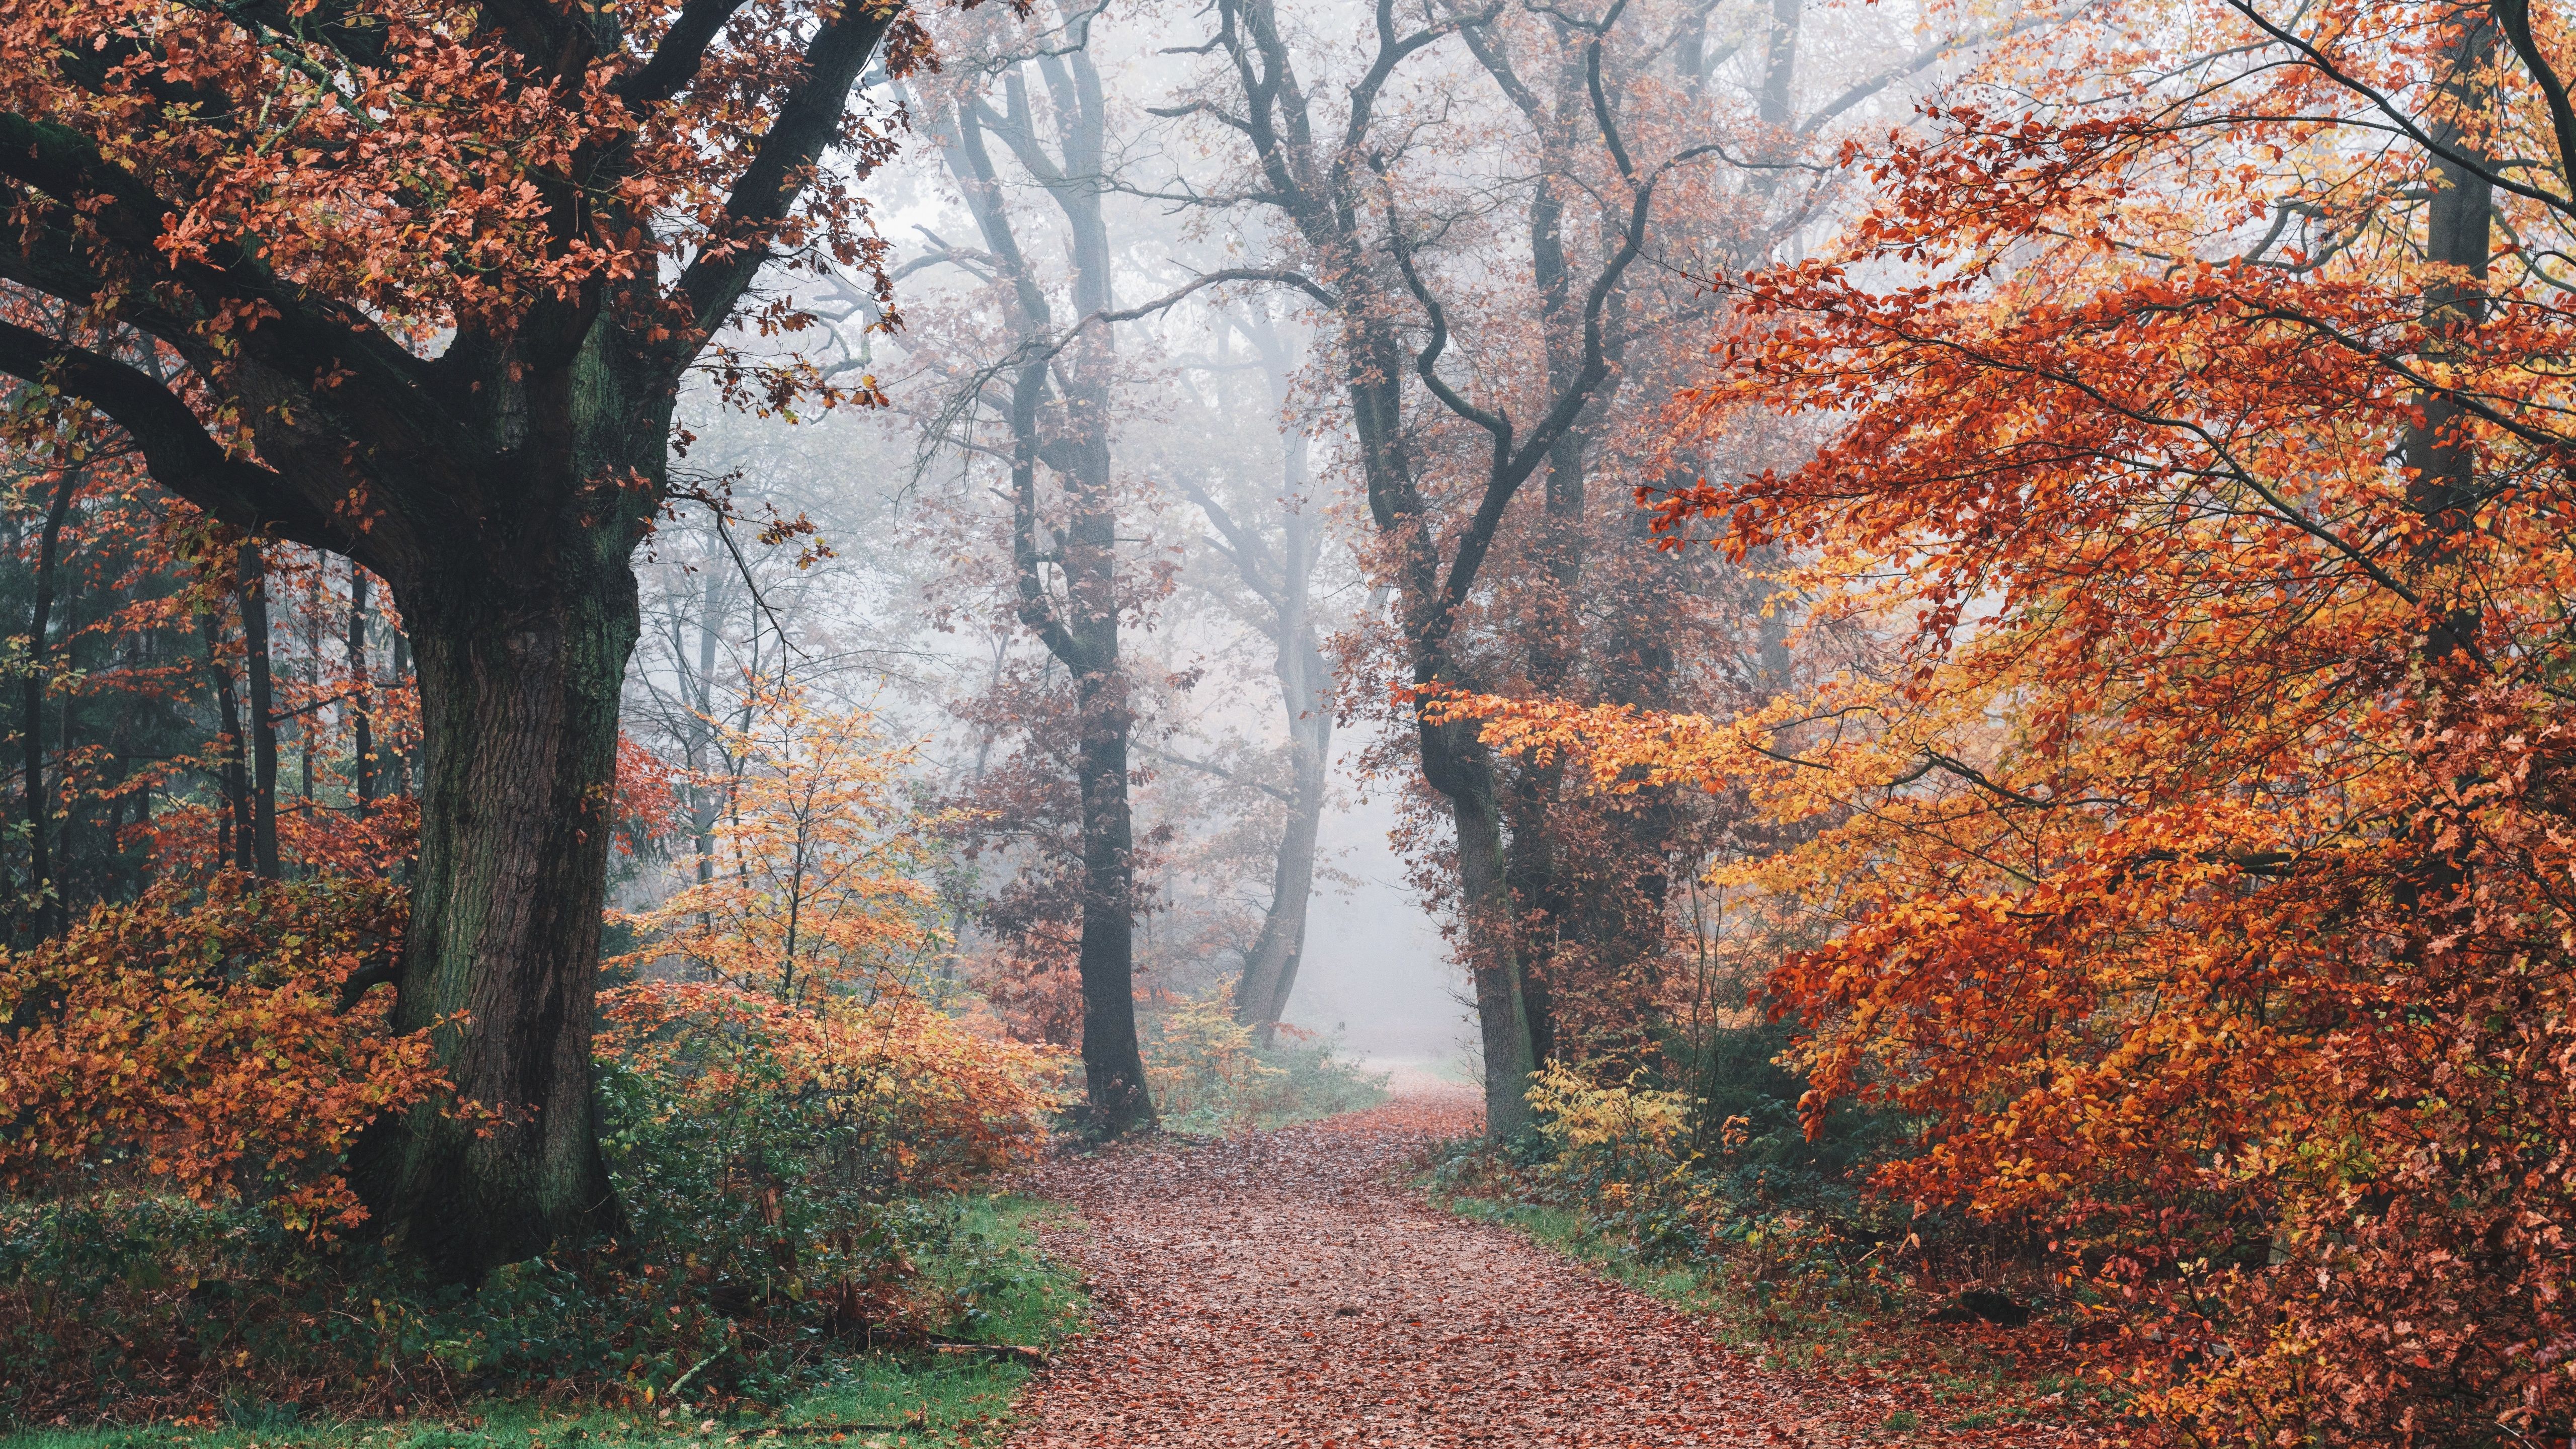 Autumn Wallpaper 4K, Forest, Fall Foliage, Trees, Foggy, Morning, 5K, Nature